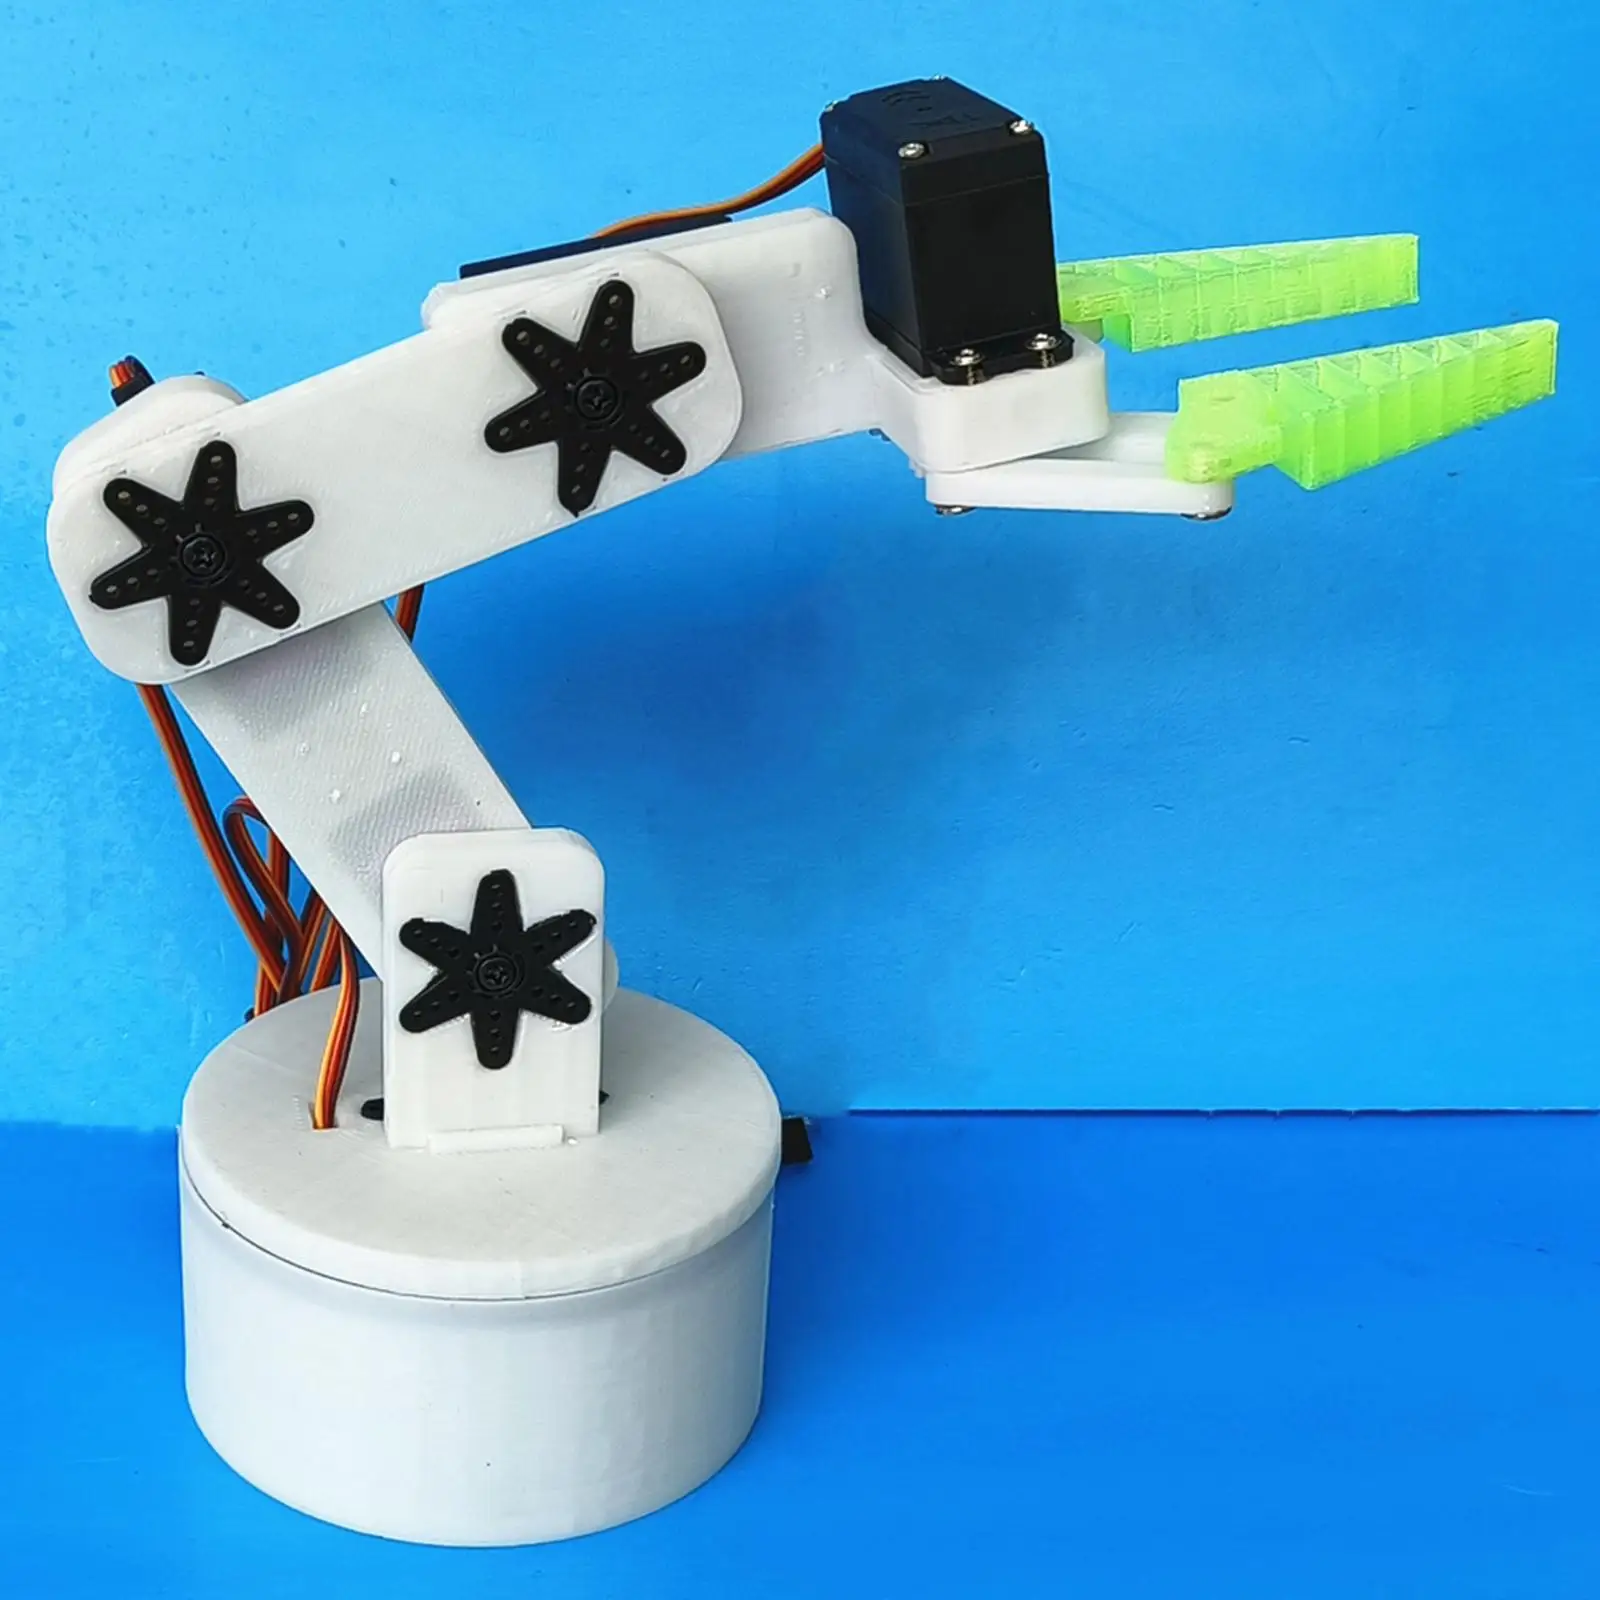 Robot Arm Building Kit Manipulator Electronics Science Toy for Teens, Kids